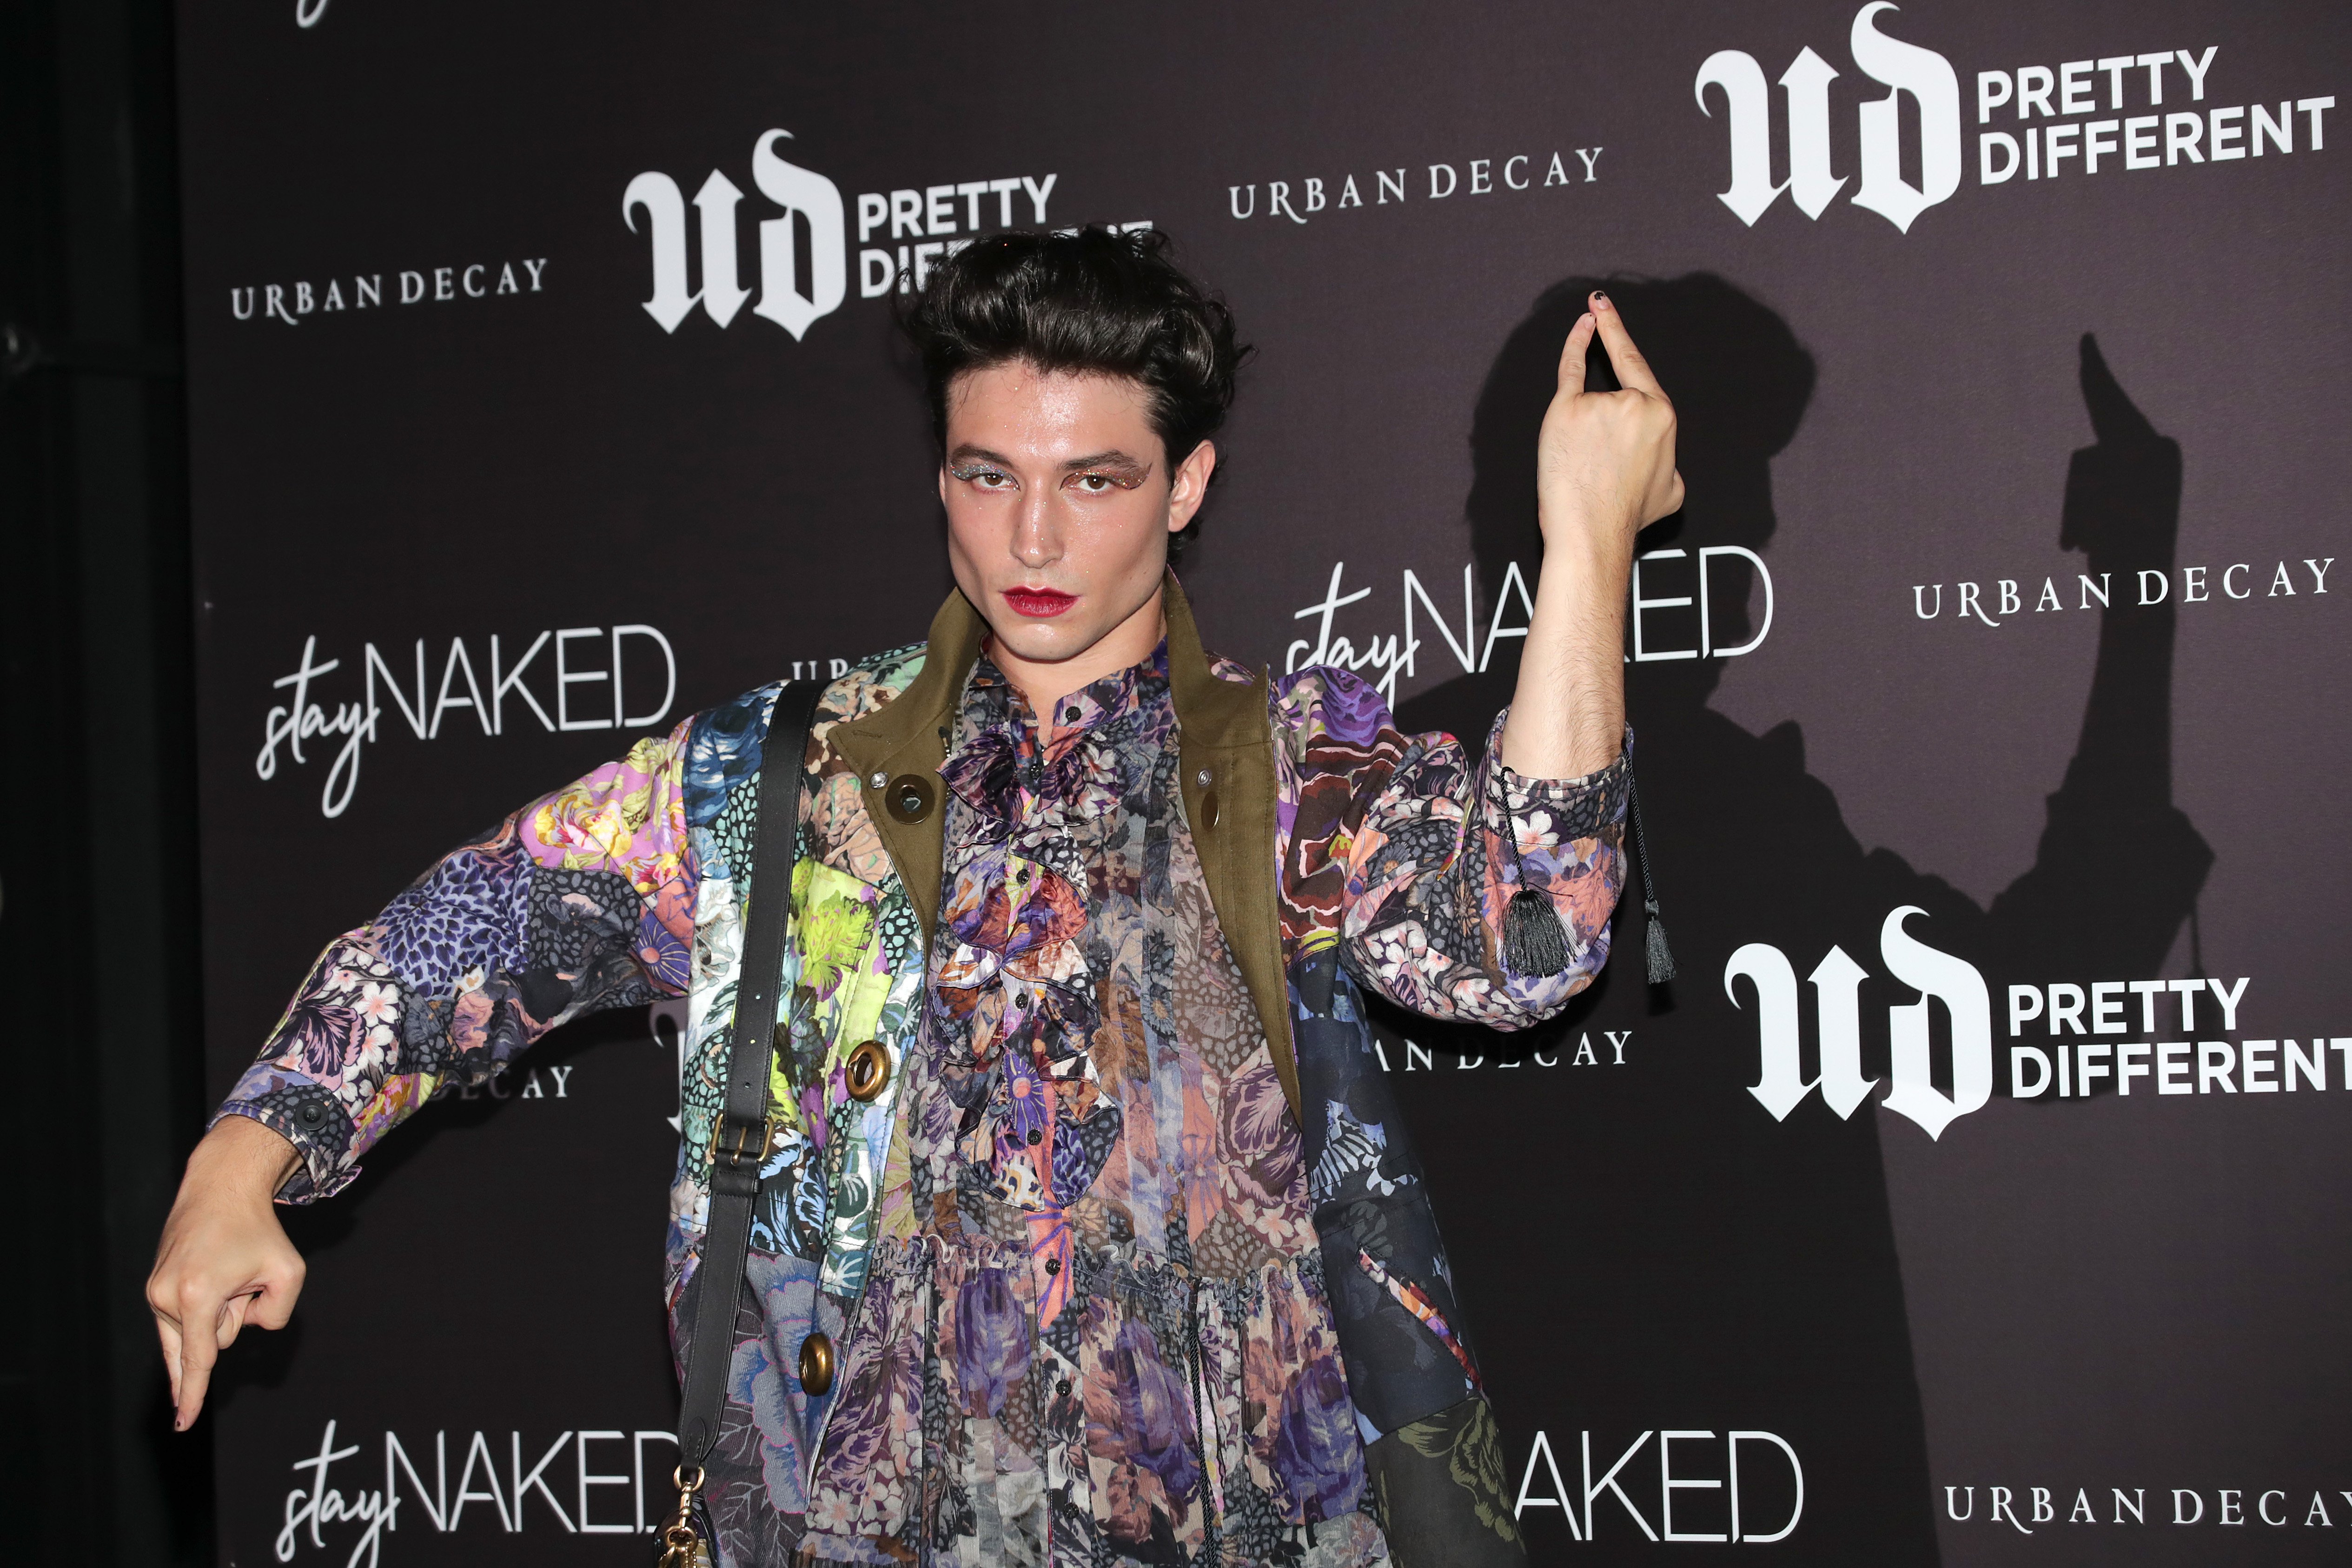 Ezra Miller at the photocall for 'URBAN DECAY' stayNAKED launch on August 20, 2019, in Seoul | Source: Getty Images